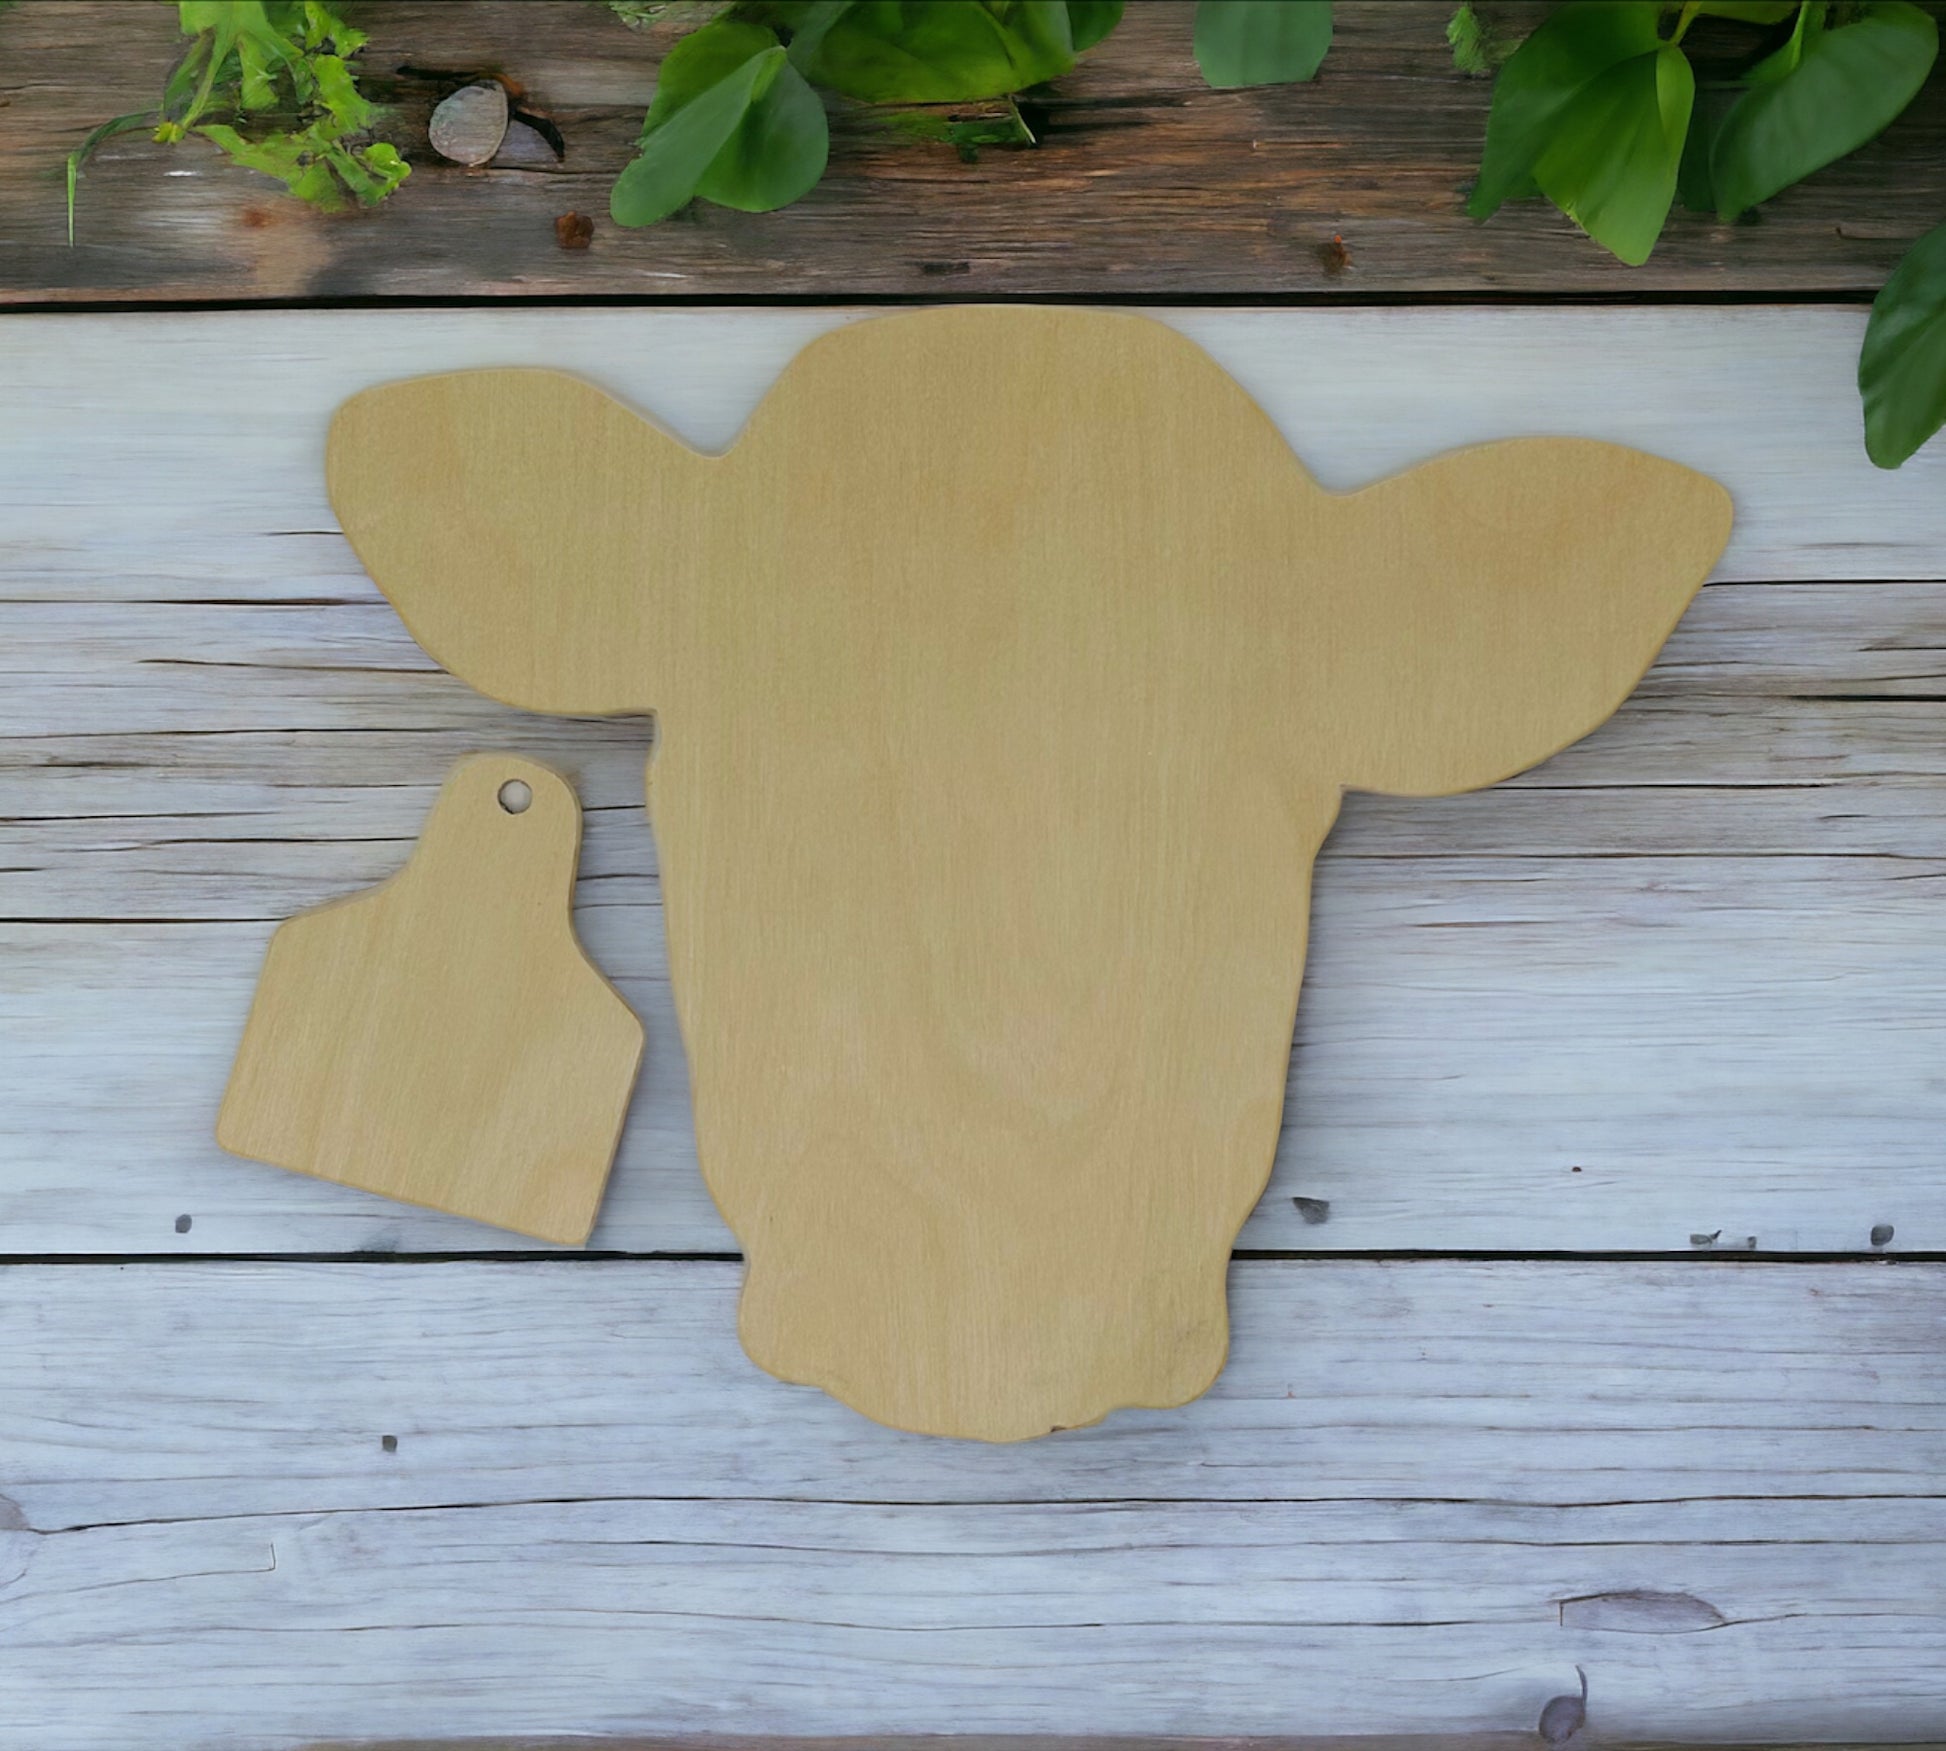 wooden cow head farming crafting supplies cutout for art and DIY projects.